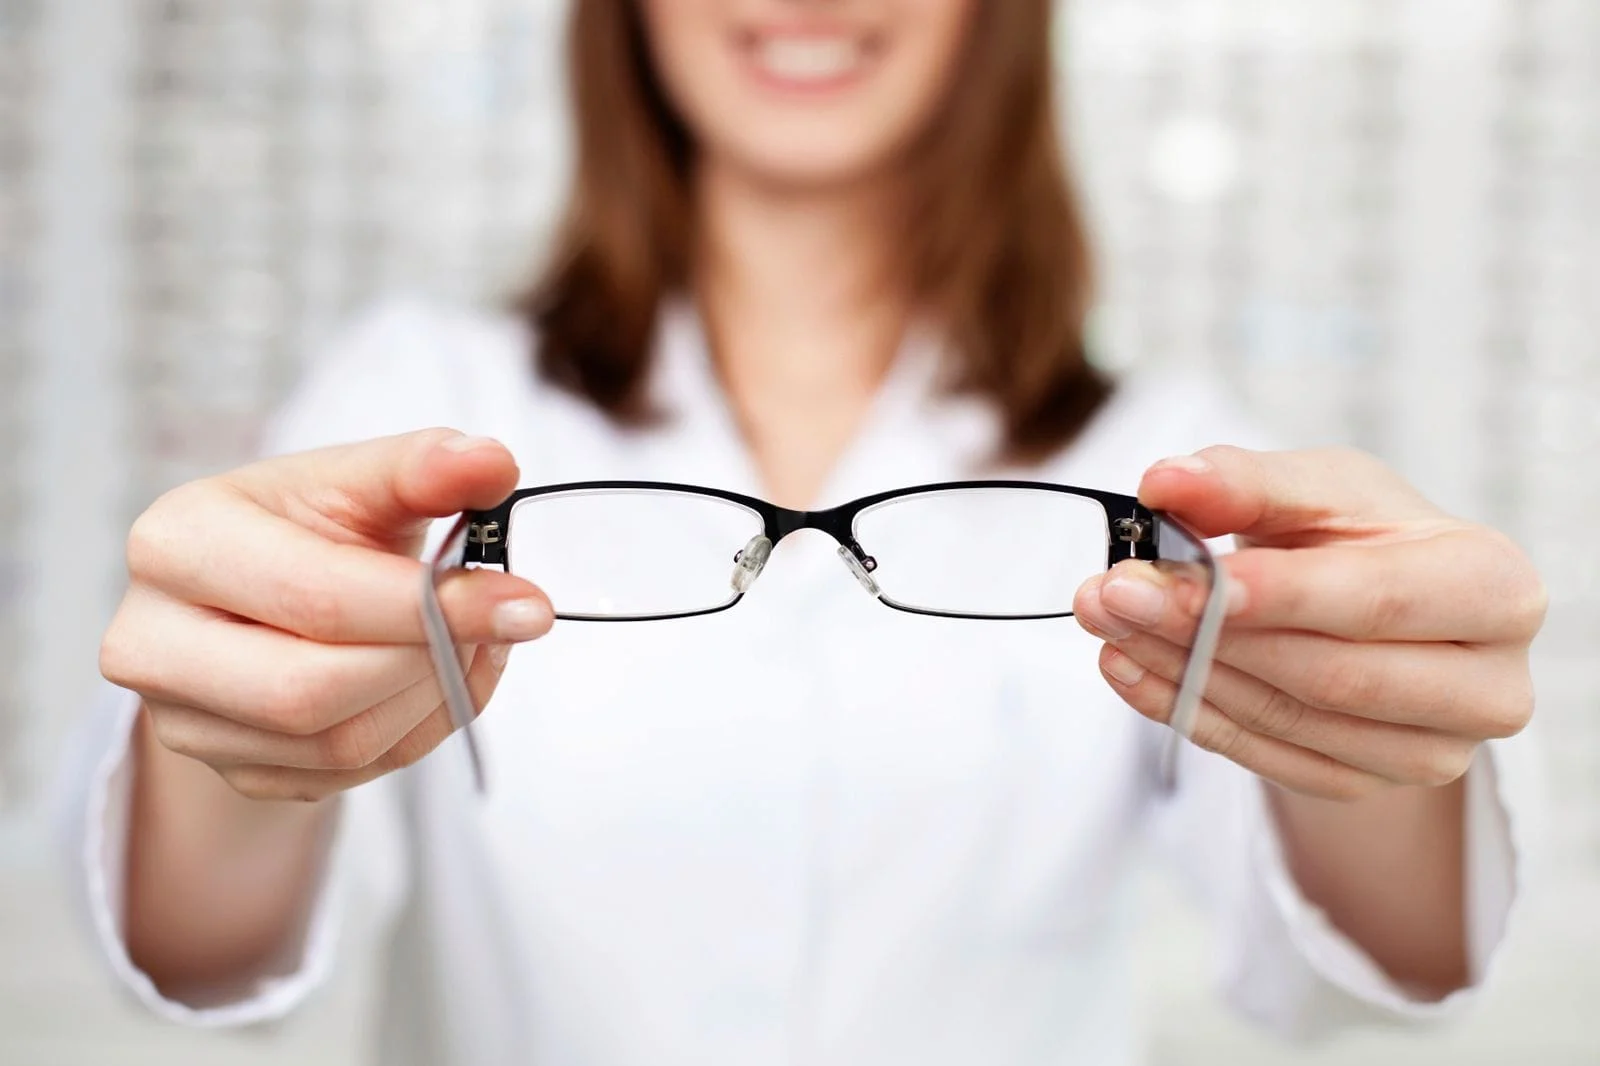 If you're in need of a lens prescription come see our optometrist in Winnipeg. Call us today to make an appointment!